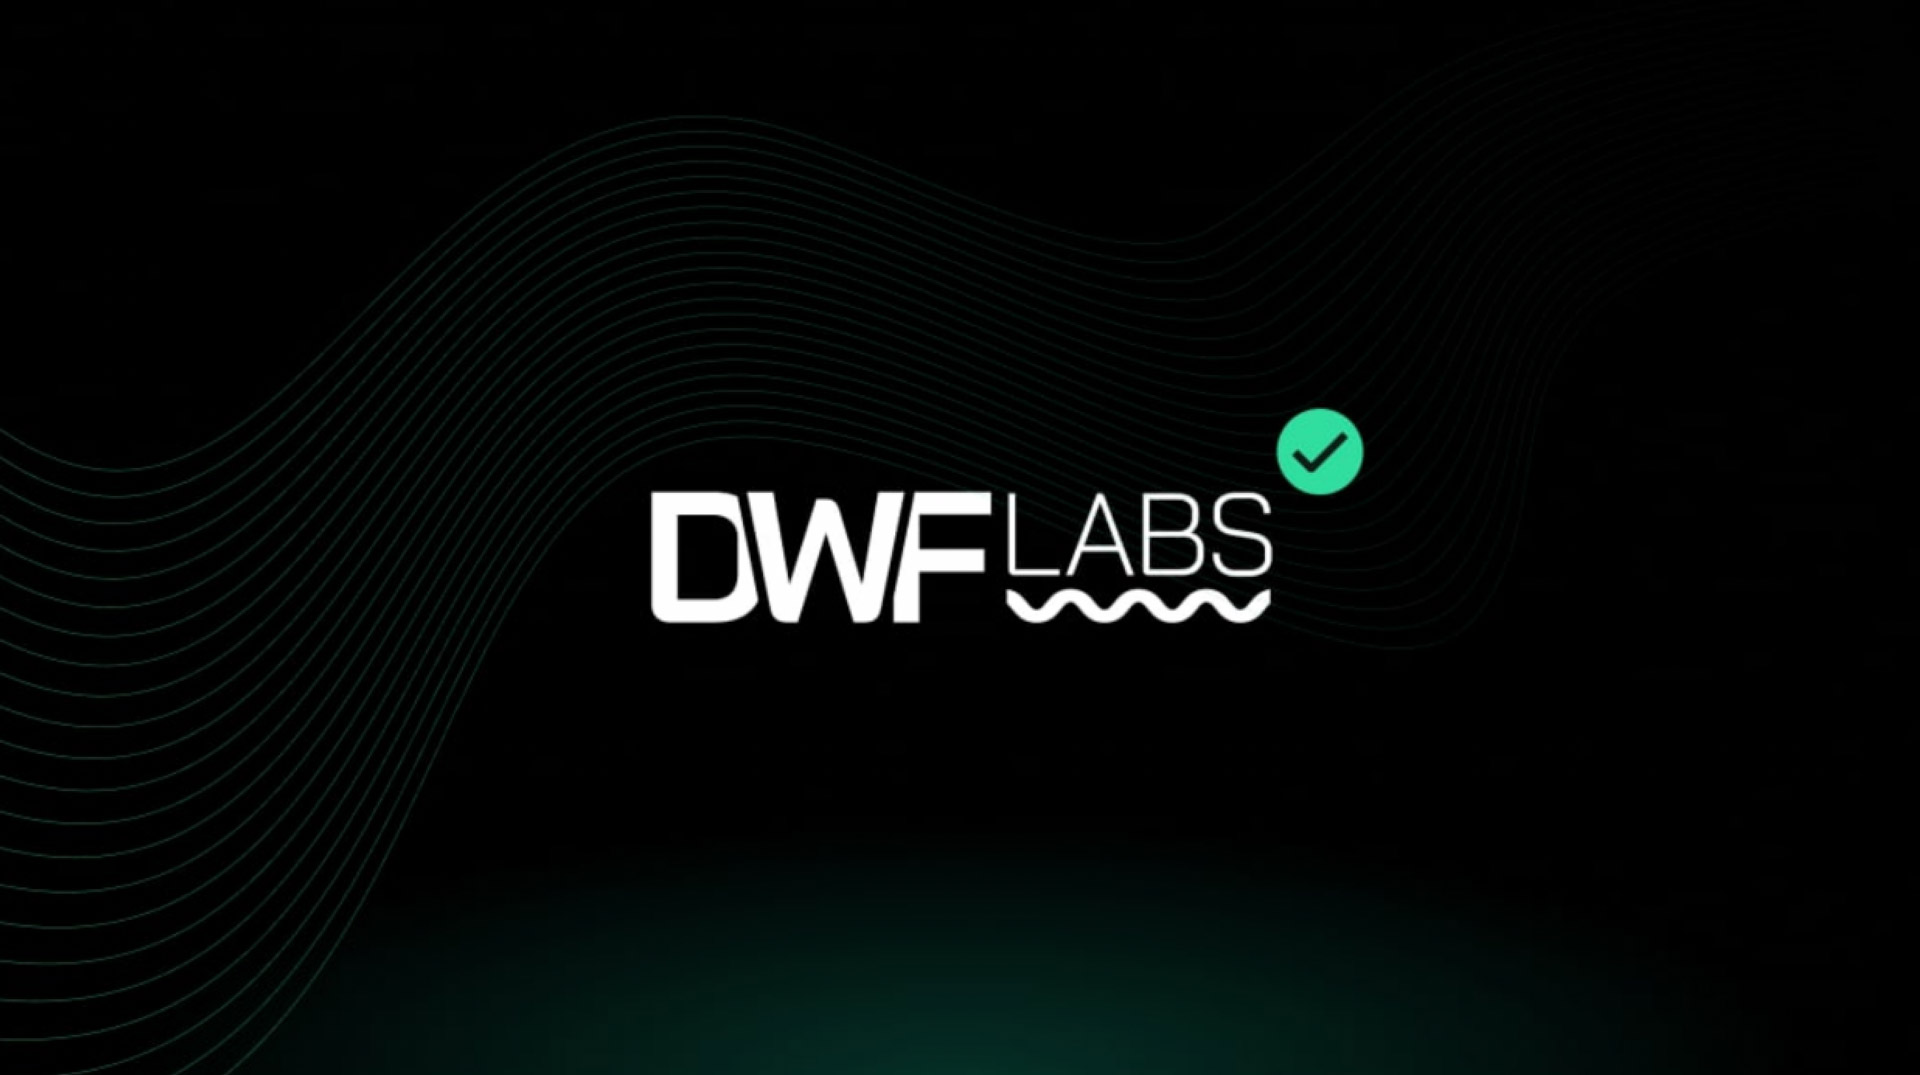 DWF Labs Allocates $15M to Support Distressed Protocols Through Binance Labs’ Web3 Industry Recovery Initiative